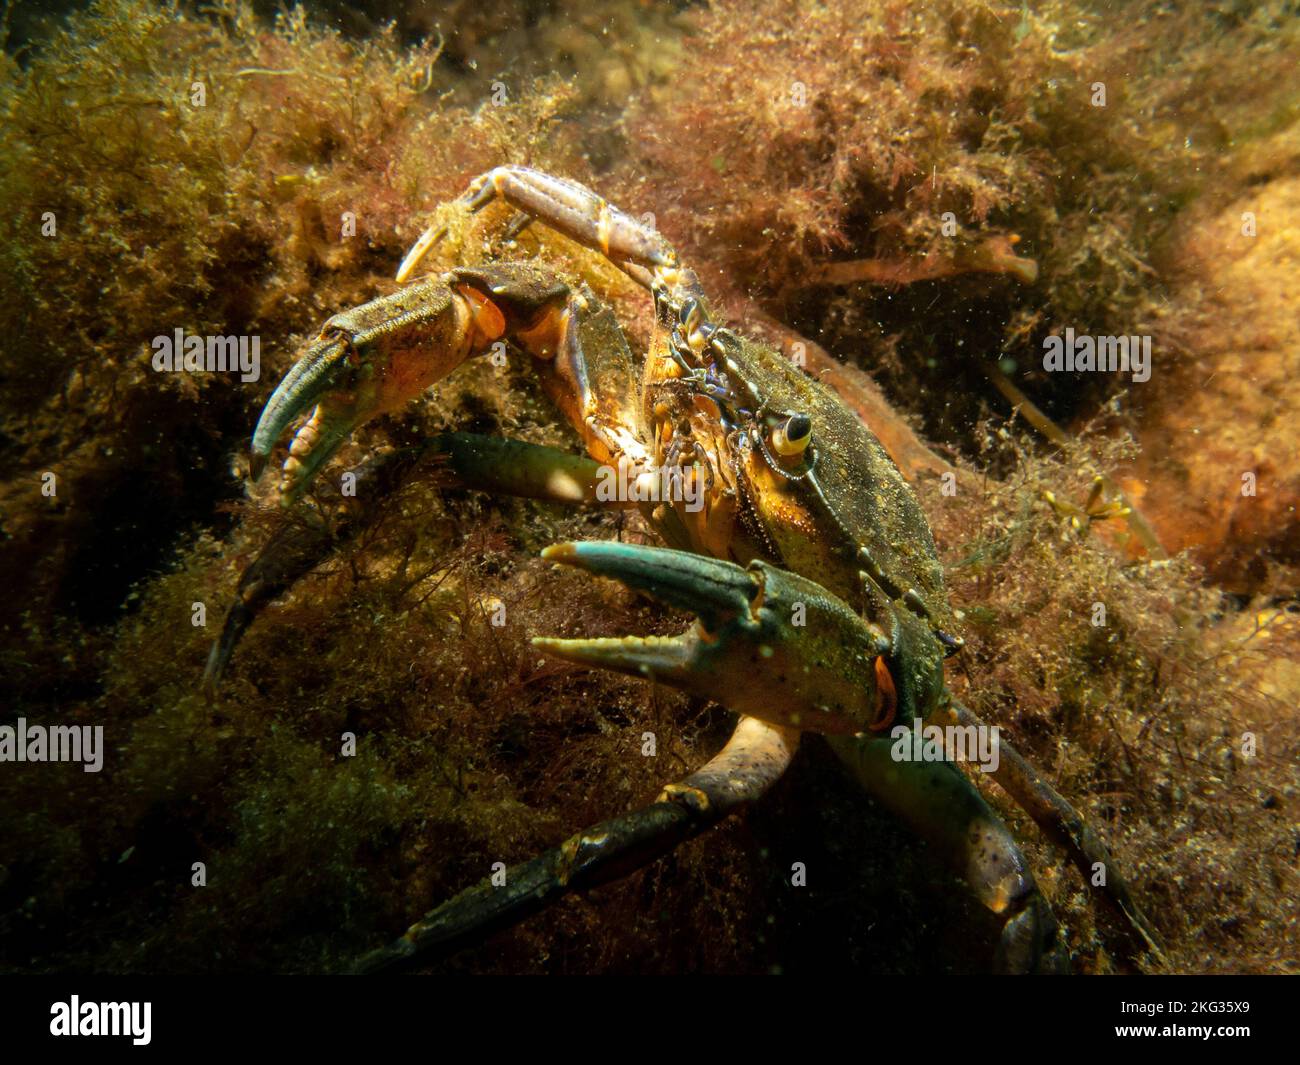 A close-up picture of a crab among seaweed. Picture from The Sound, between Sweden and Denmark Stock Photo